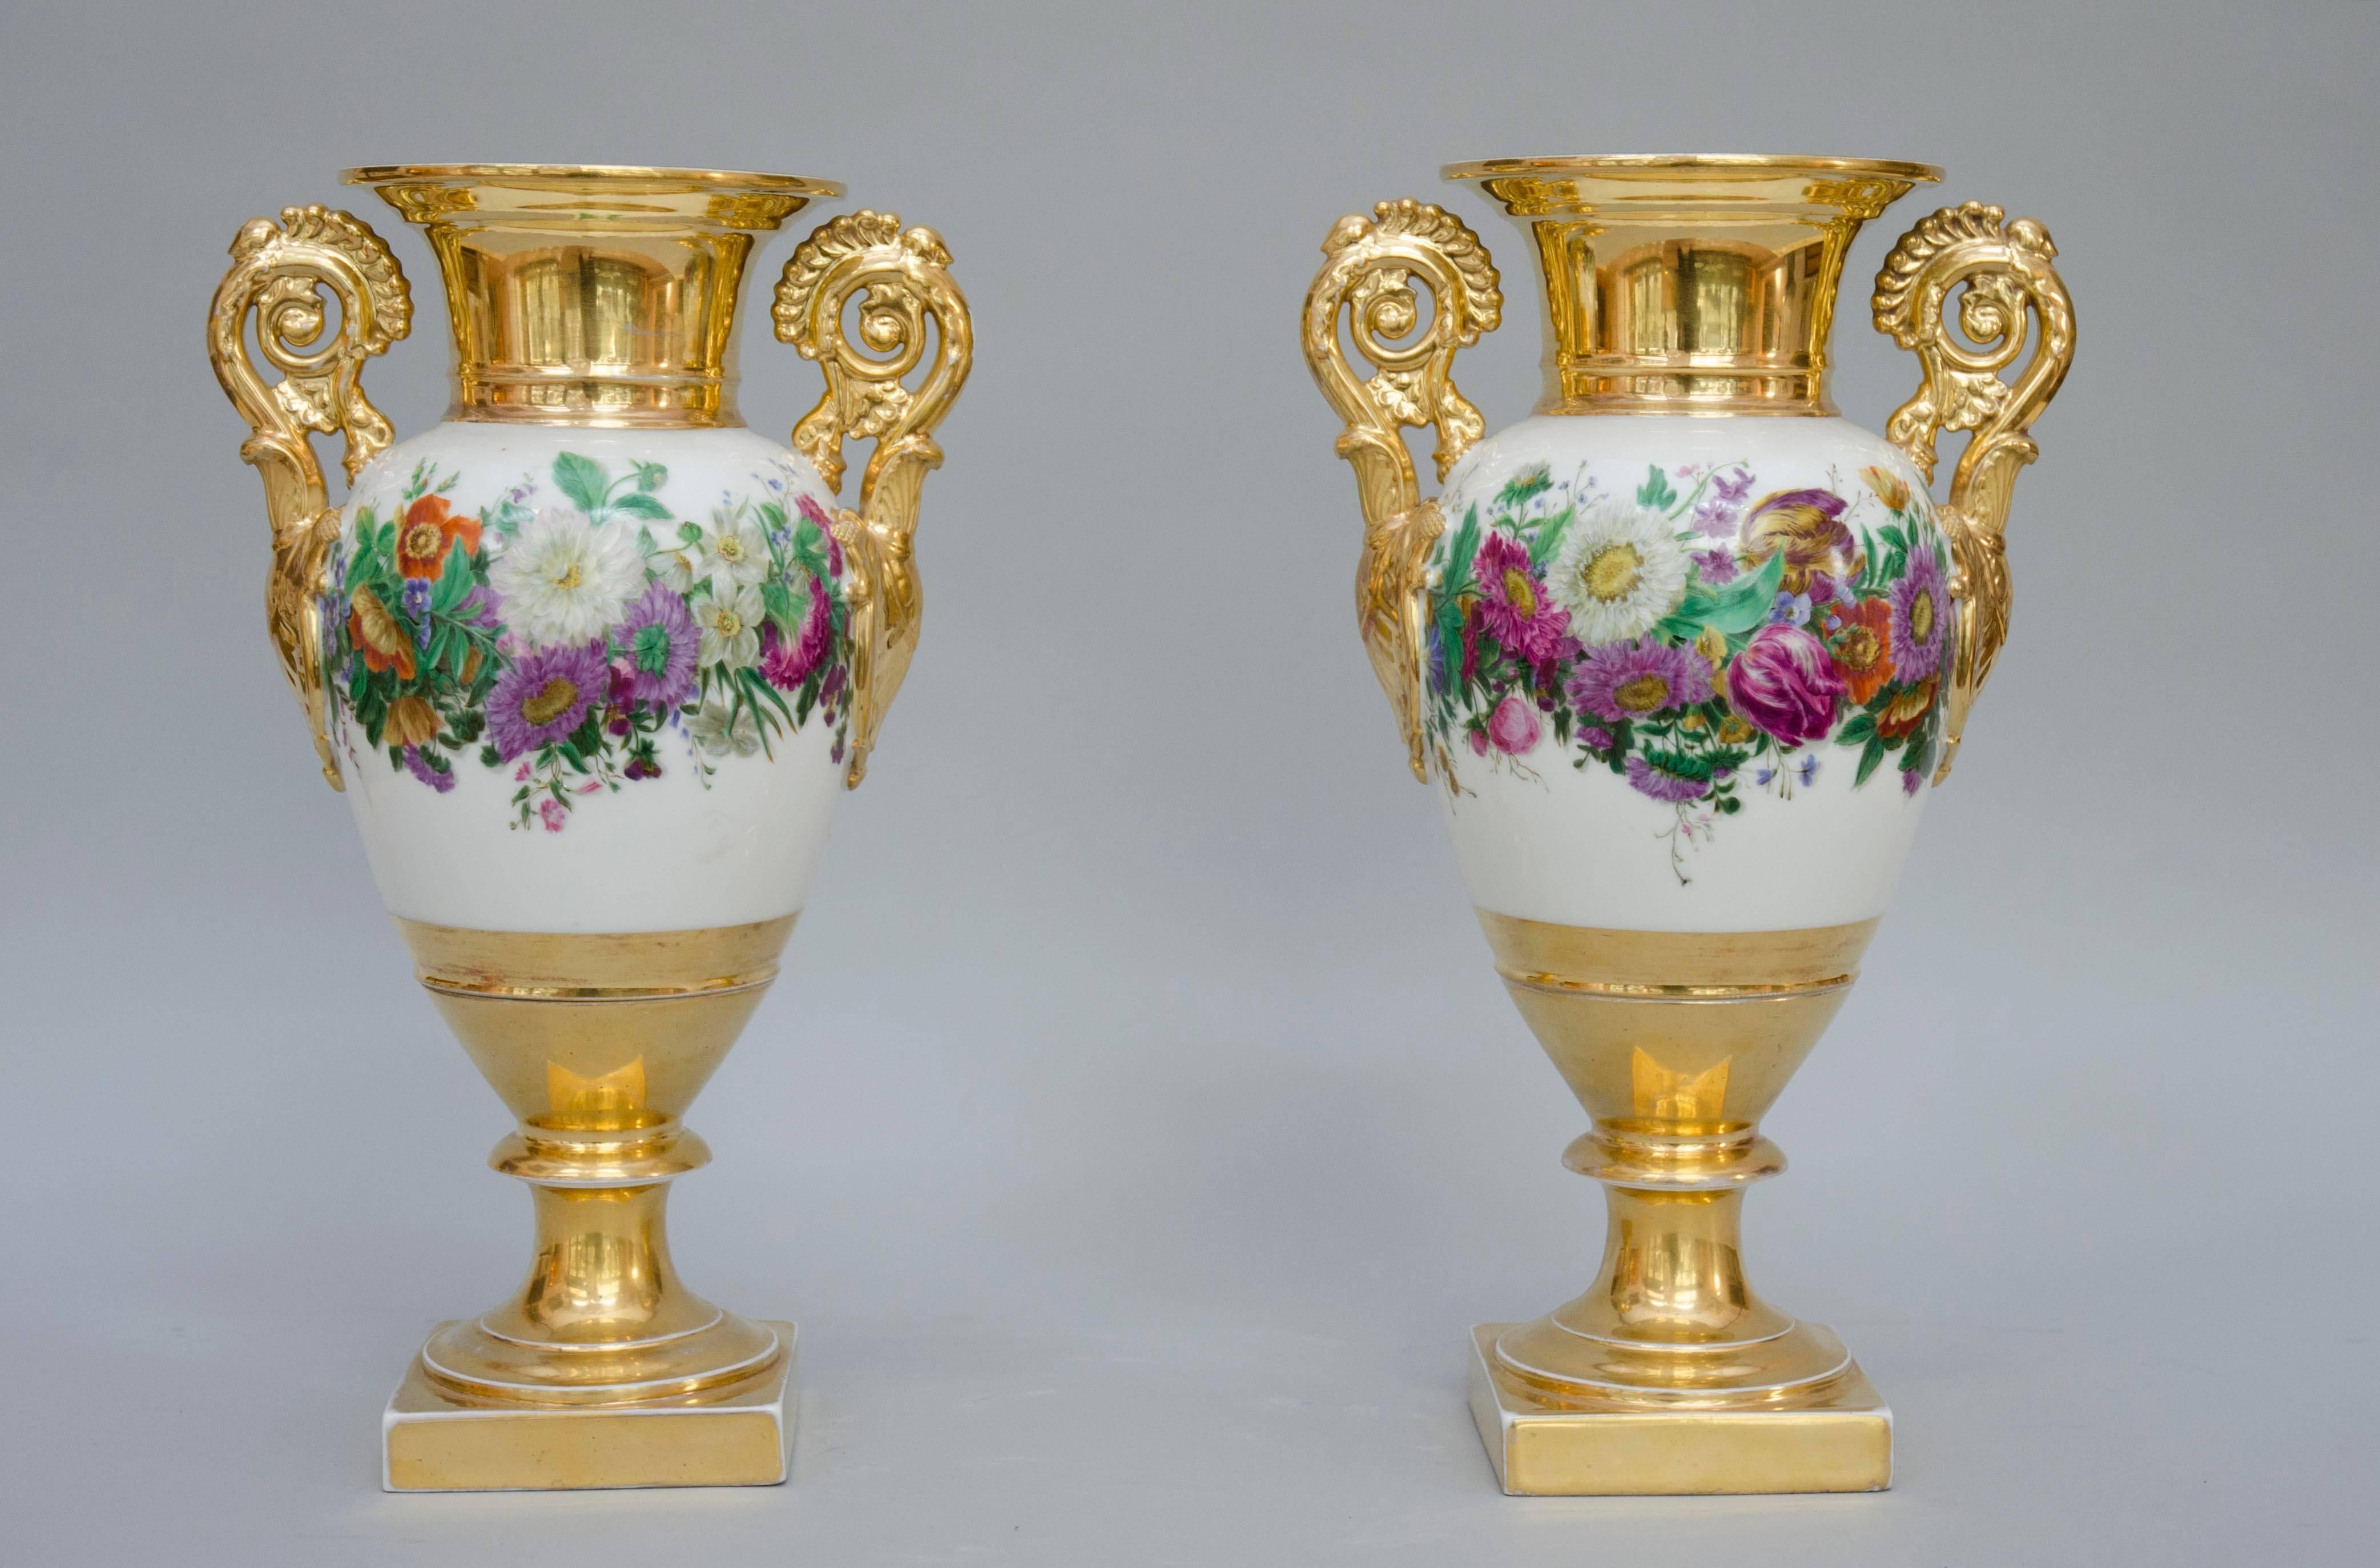 French Mid-19th Century Large Pair of Egg Shaped Vases with Garlands of Flowers, Paris For Sale